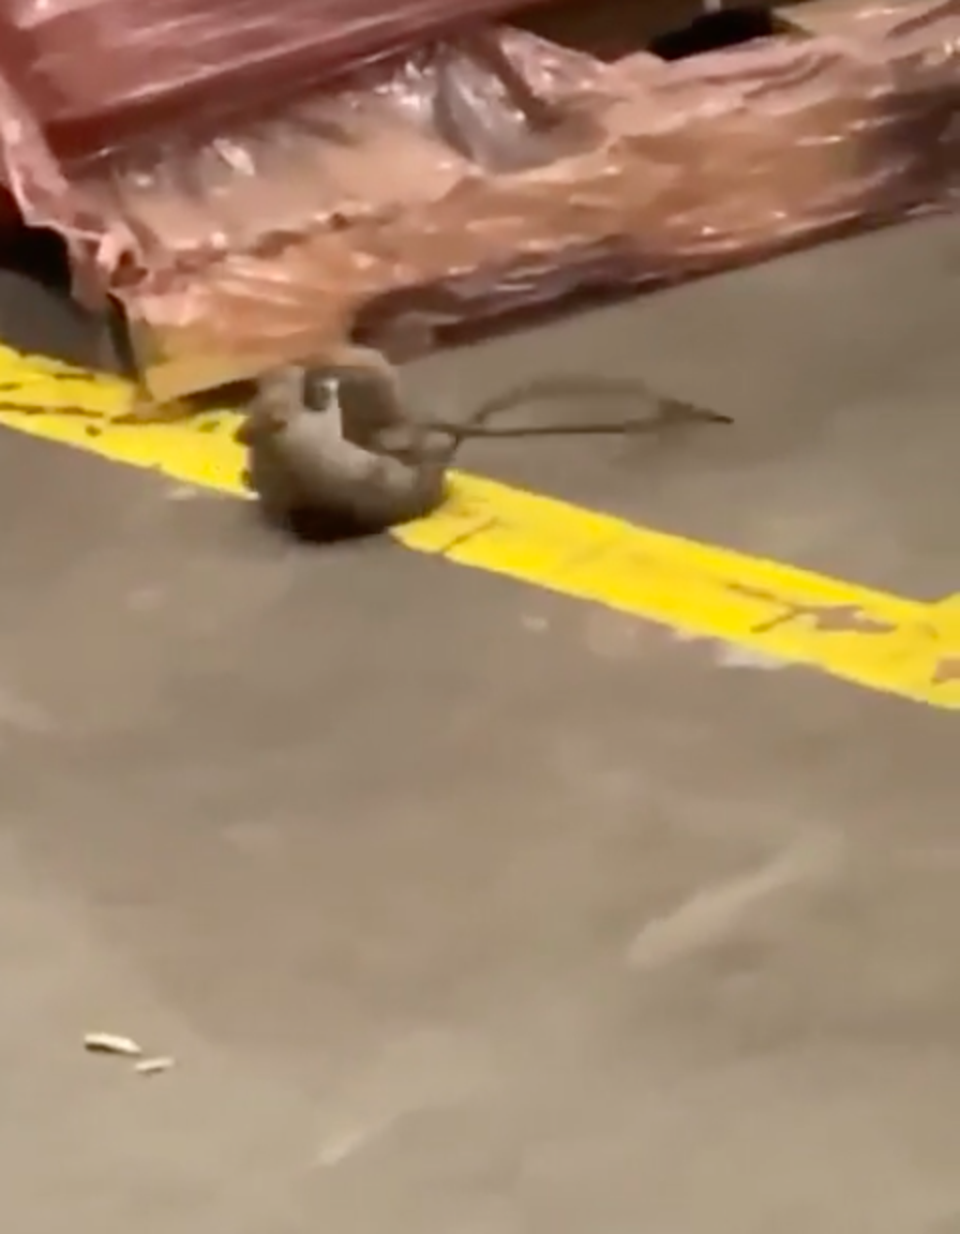 Rats are seen fighting inside the Family Dollar warehouse in Arkansas, as part of the evidence provided by the attorney general office in their lawsuit against the discount retailer. (Arkansas Attorney General Office)